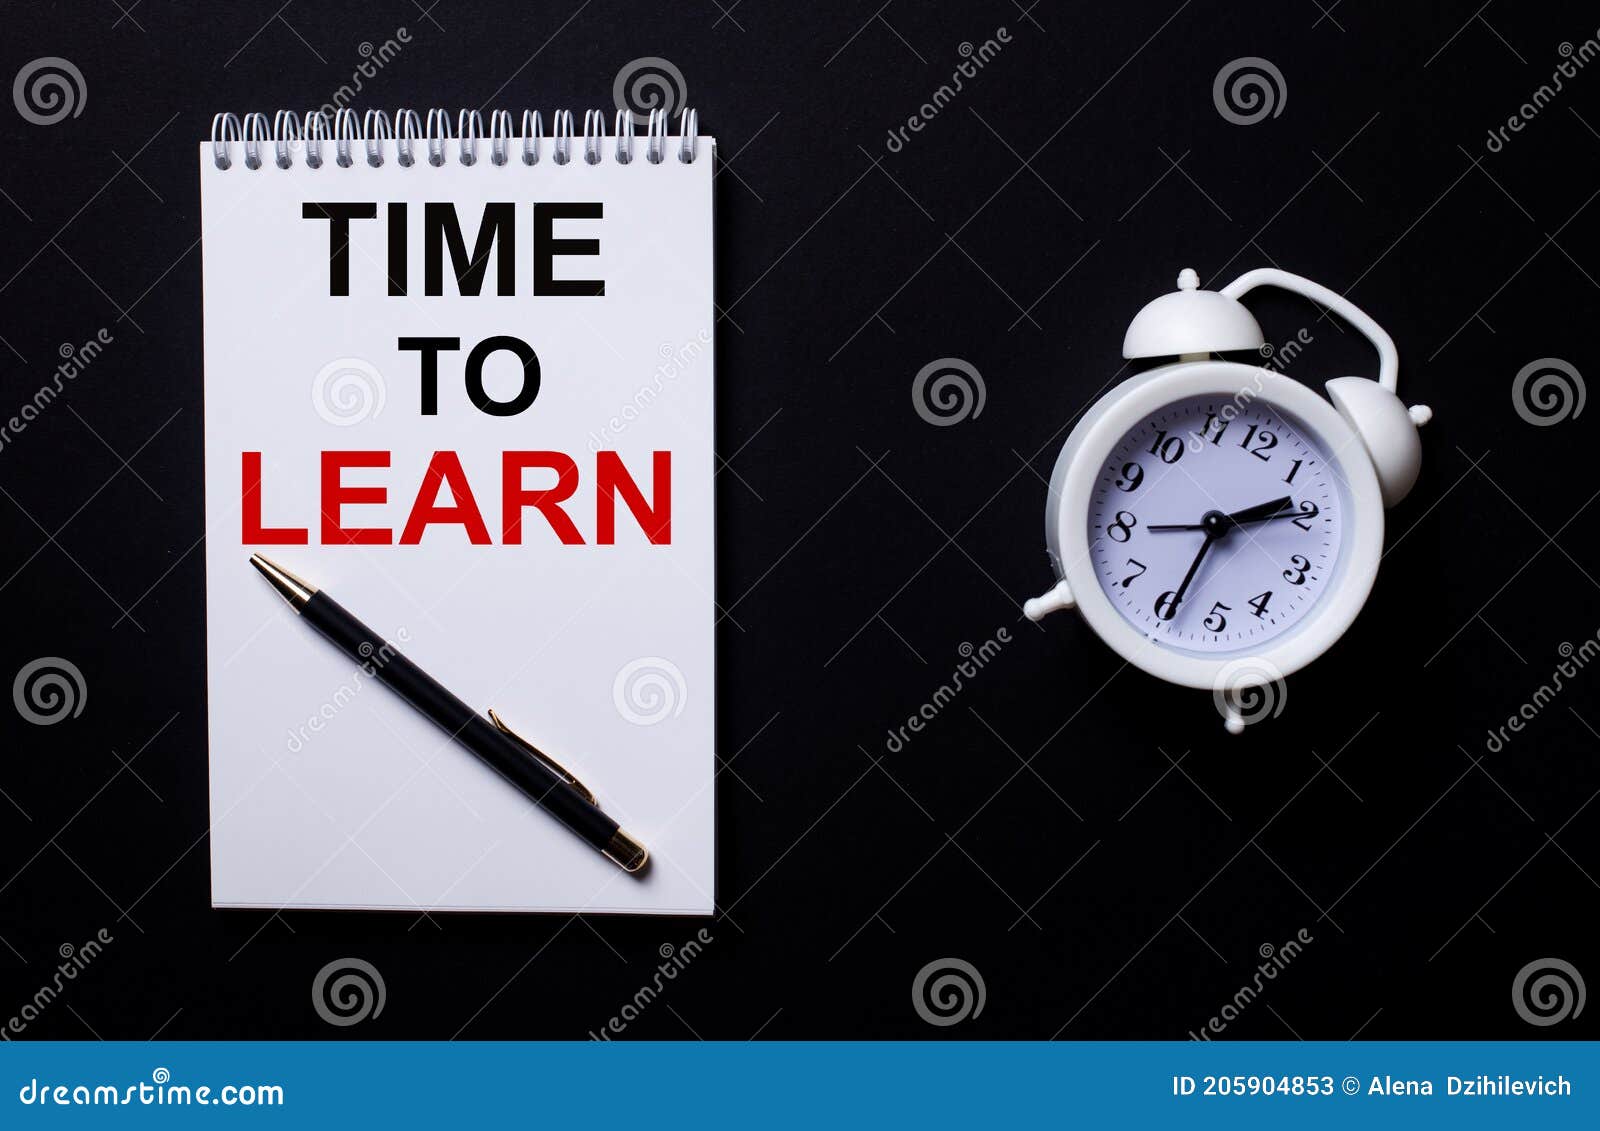 TIME TO LEARN is Written in a White Notepad Near a White Alarm